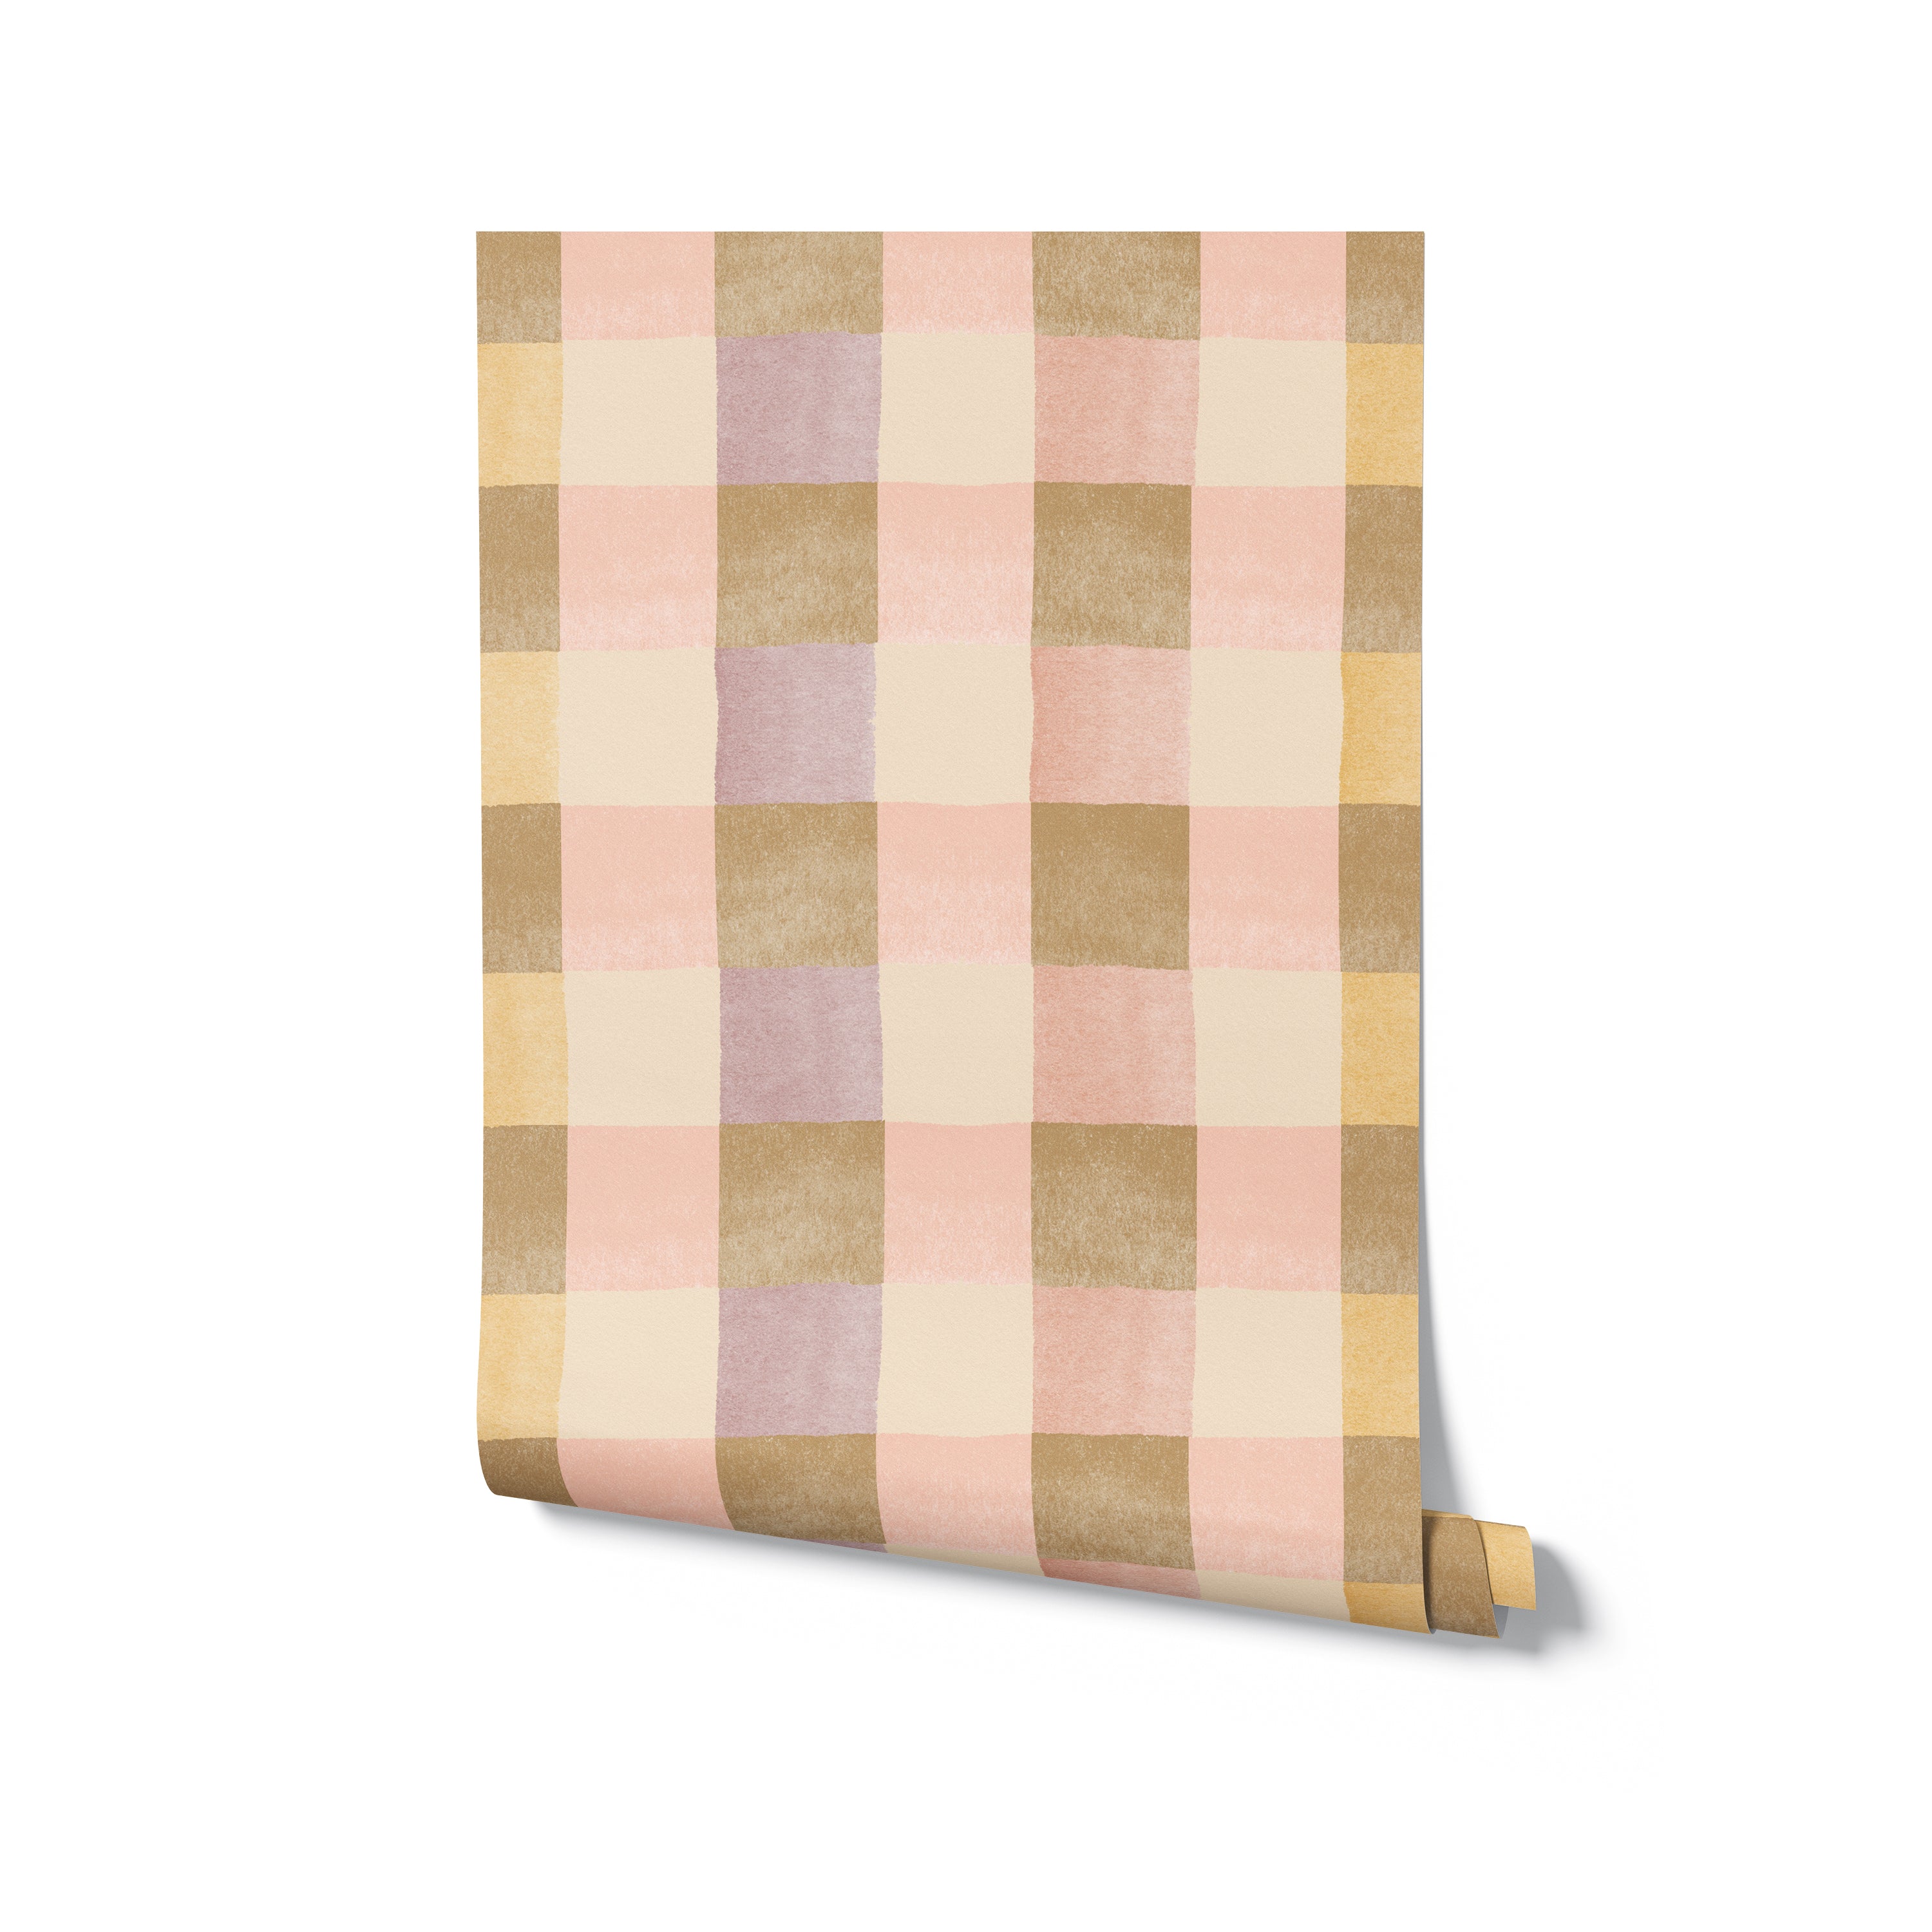 Roll of Chloé Wallpaper featuring a soft and elegant checkered pattern in pastel pink, gold, mauve, and cream. Each square is artistically finished with a unique textured effect, ideal for creating a gentle and serene room ambiance.